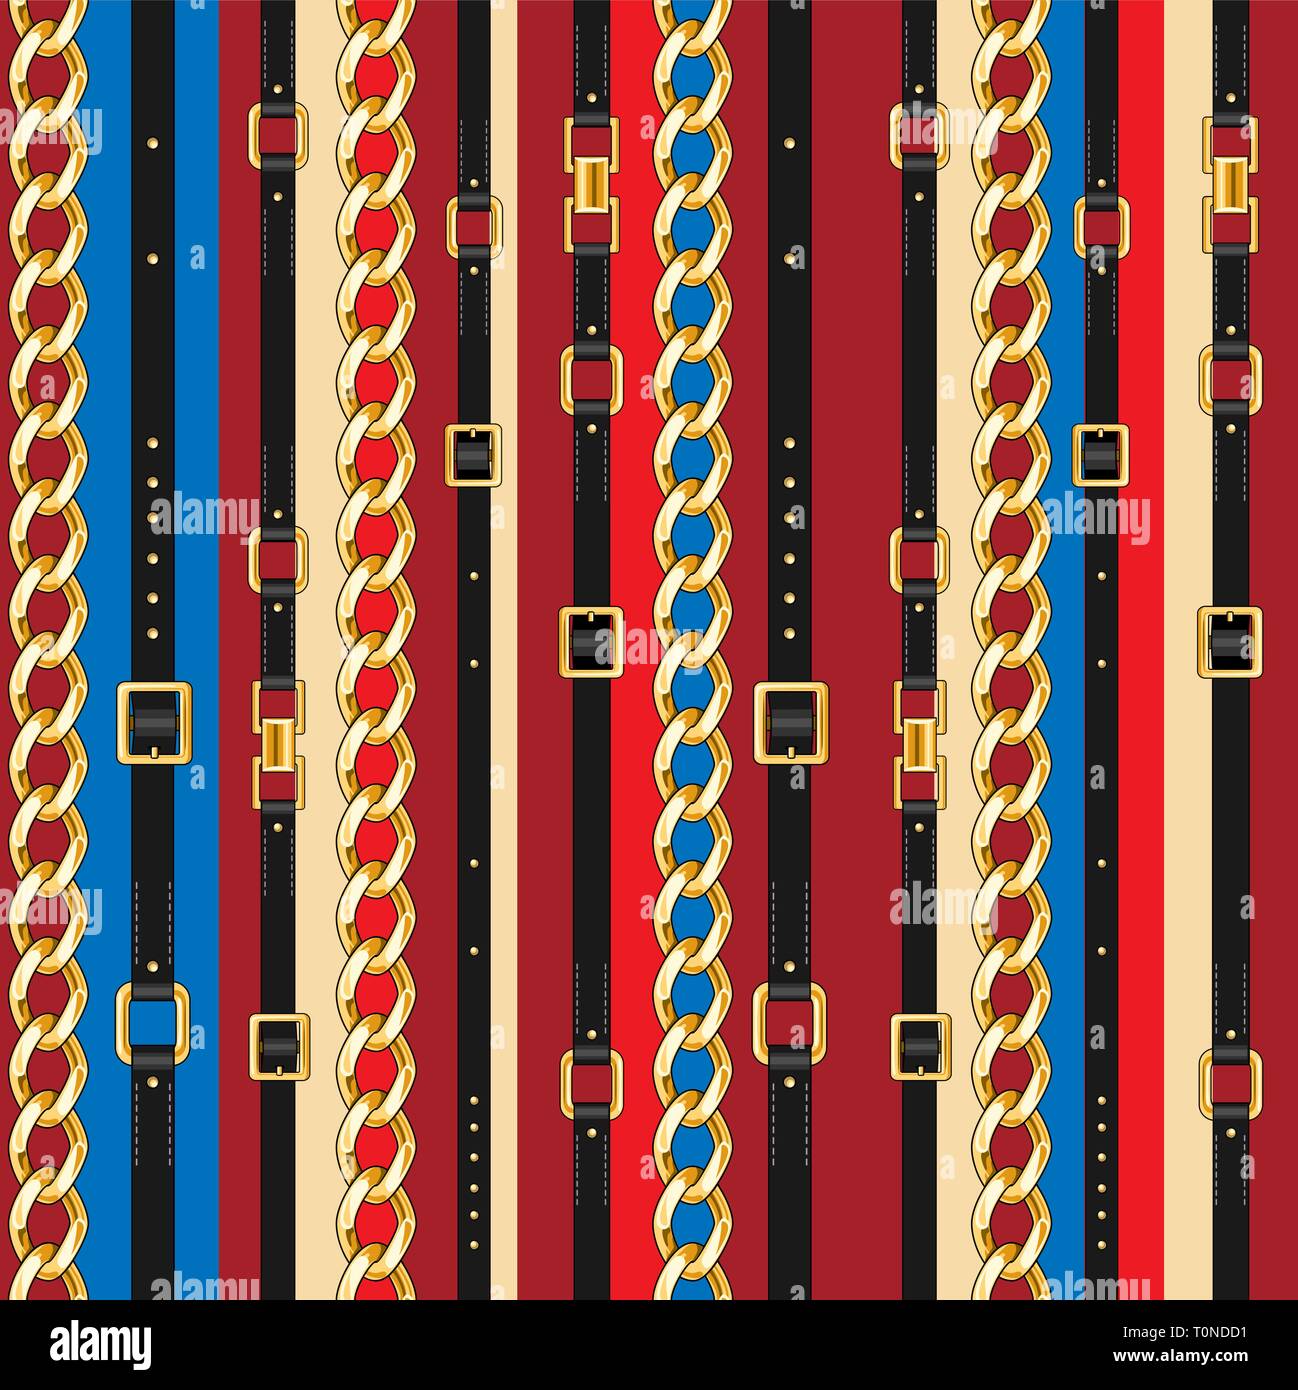 Abctract seamless pattern with belts and chain on striped for fabric. Trendy repeating print. Stock Vector